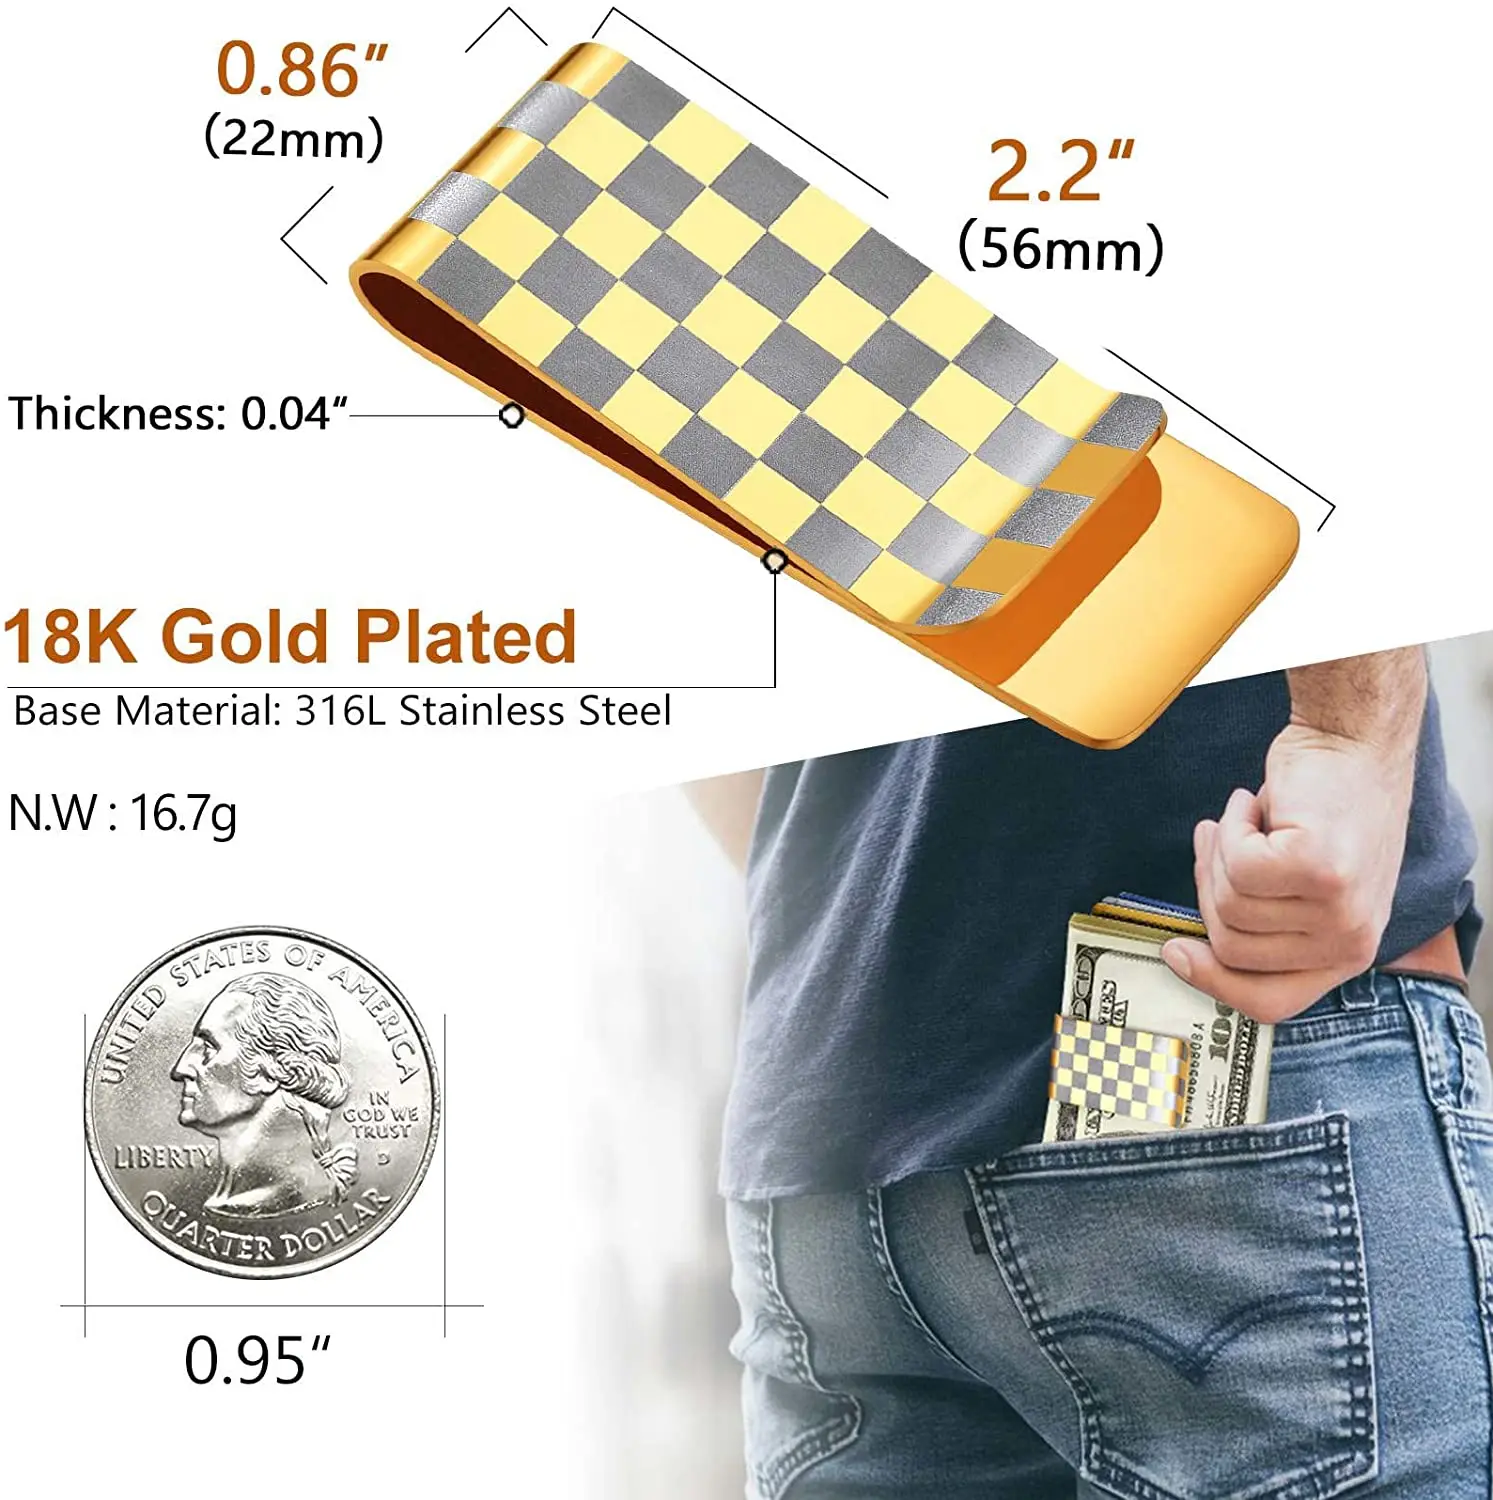 ChainsPro Can Engrave Men Money Clip- America Flag/Baseball Pattern/Box Pattern, Stainless Steel/Gold Plated CP1000 images - 6